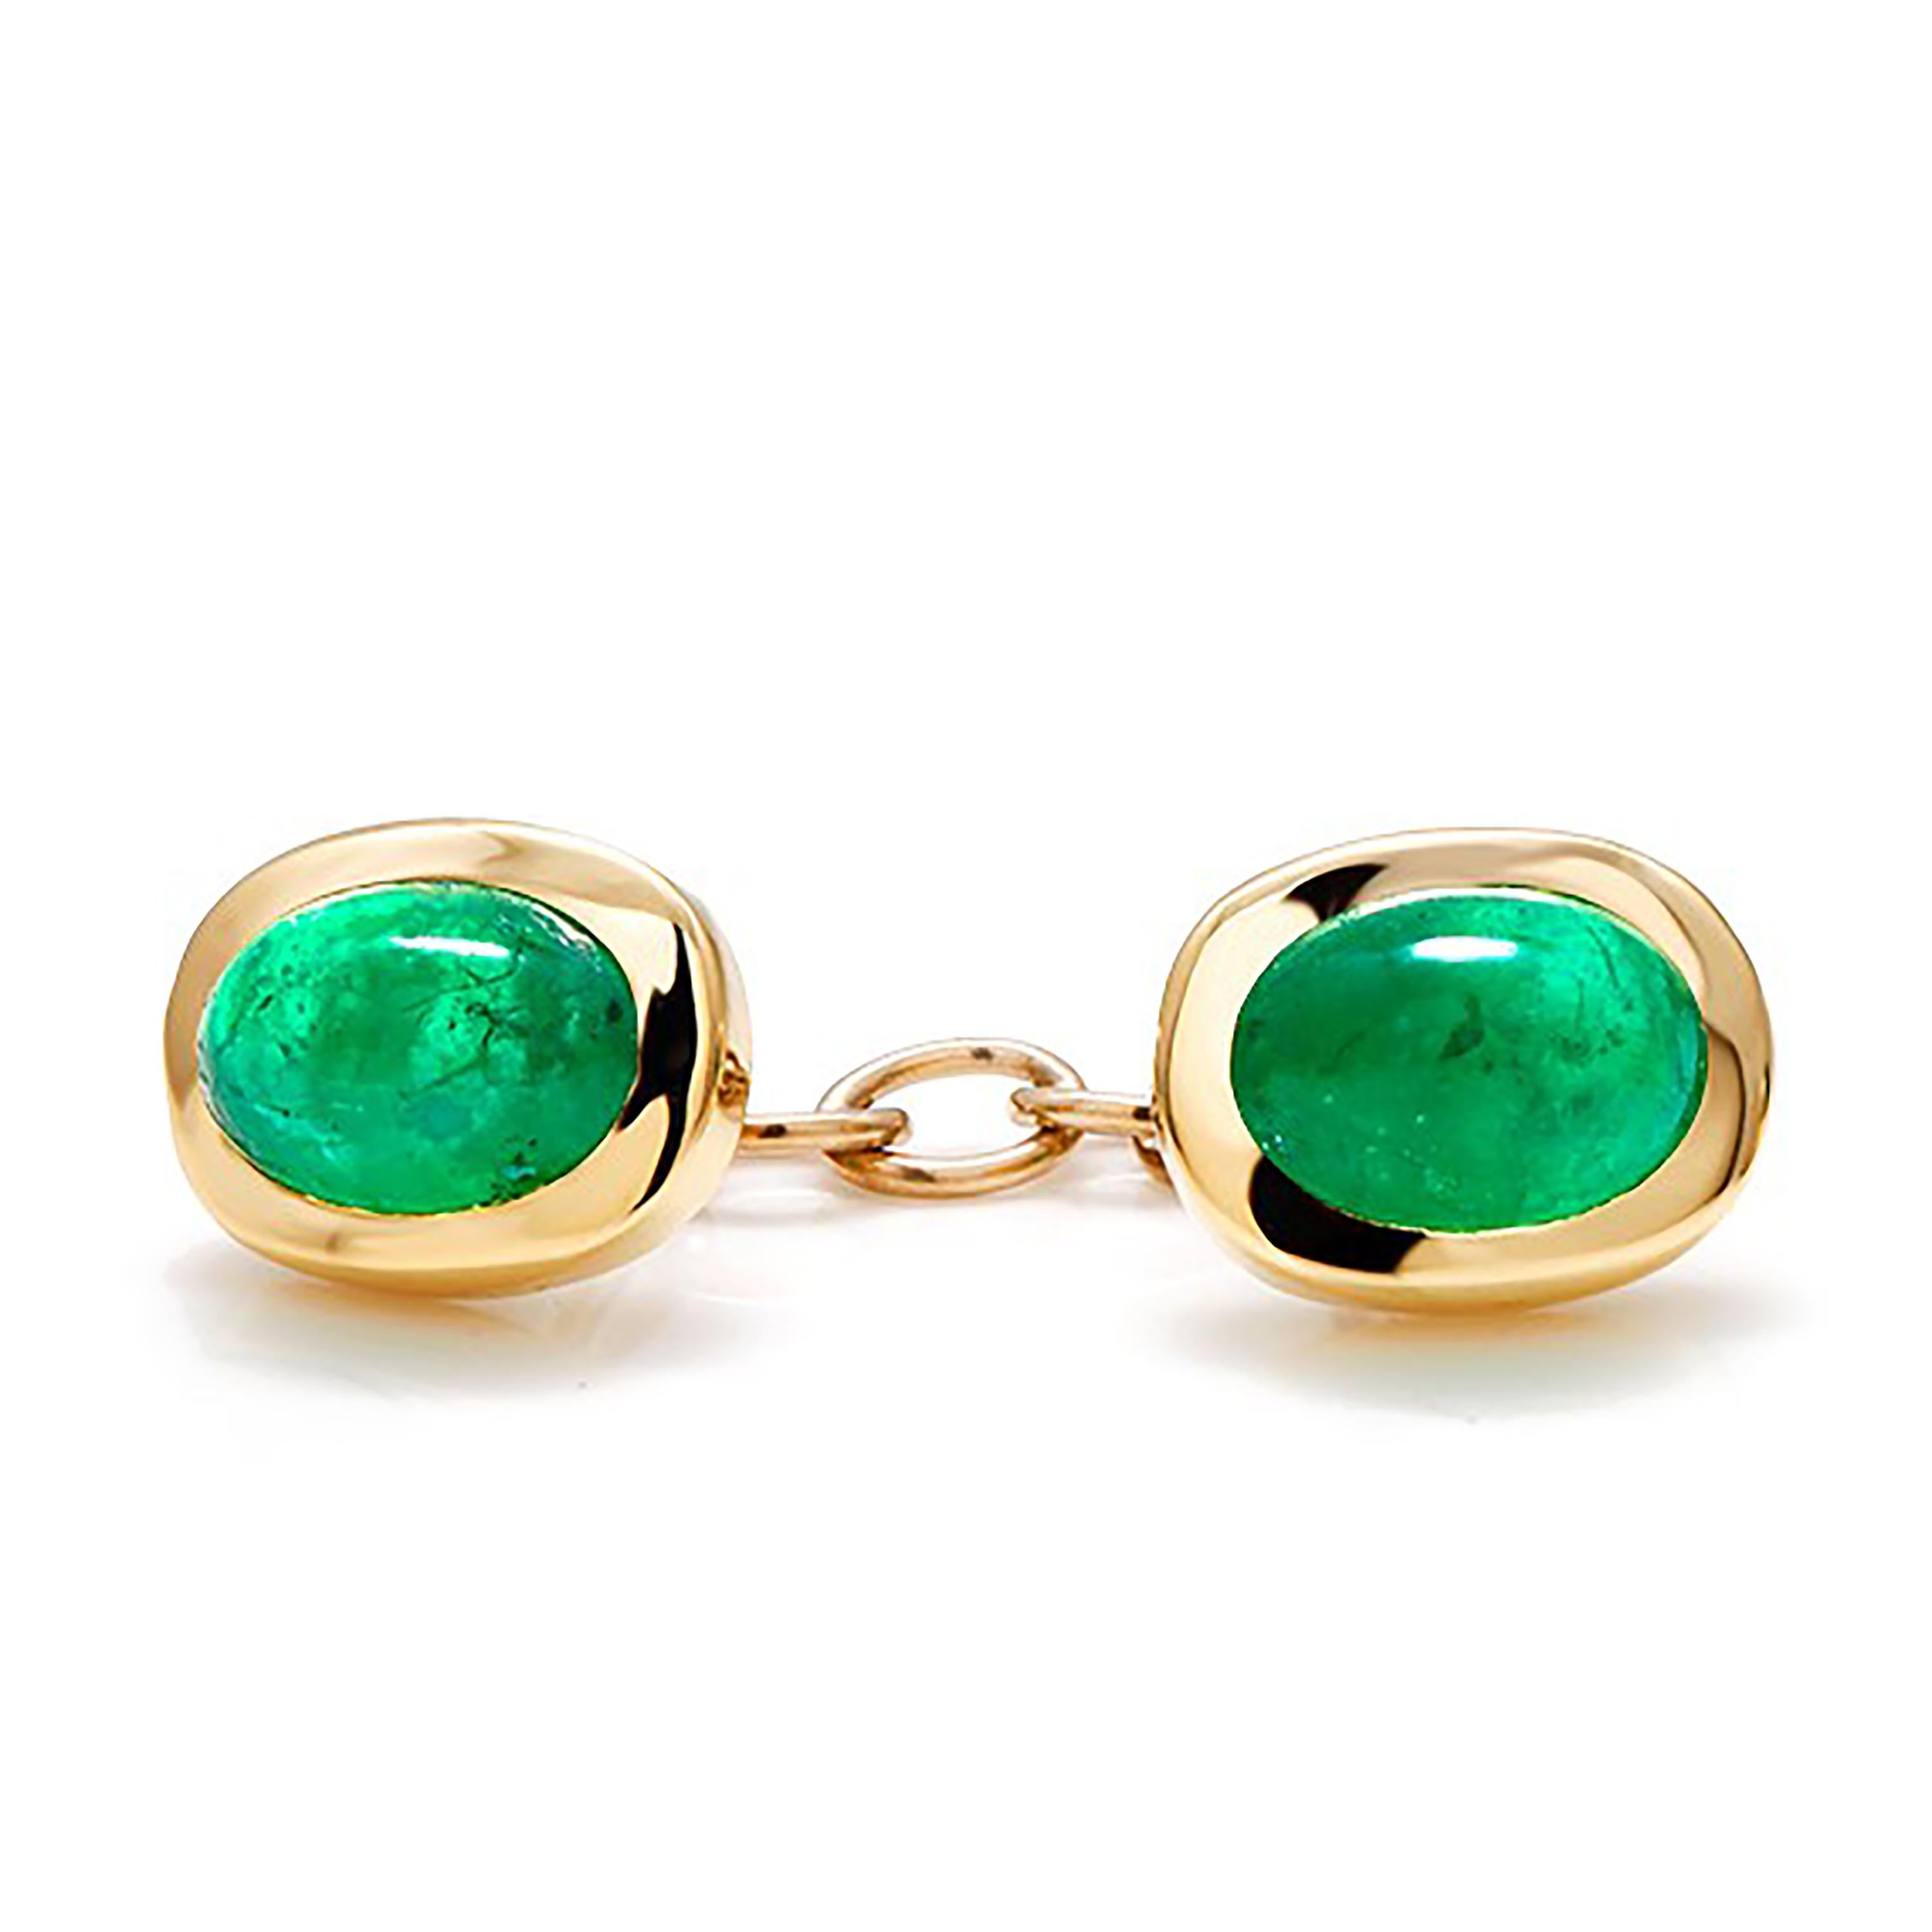 Oval Cut Modern Matching Pair of Cabochon Emerald Gents Double Sides Chain Link Cufflinks